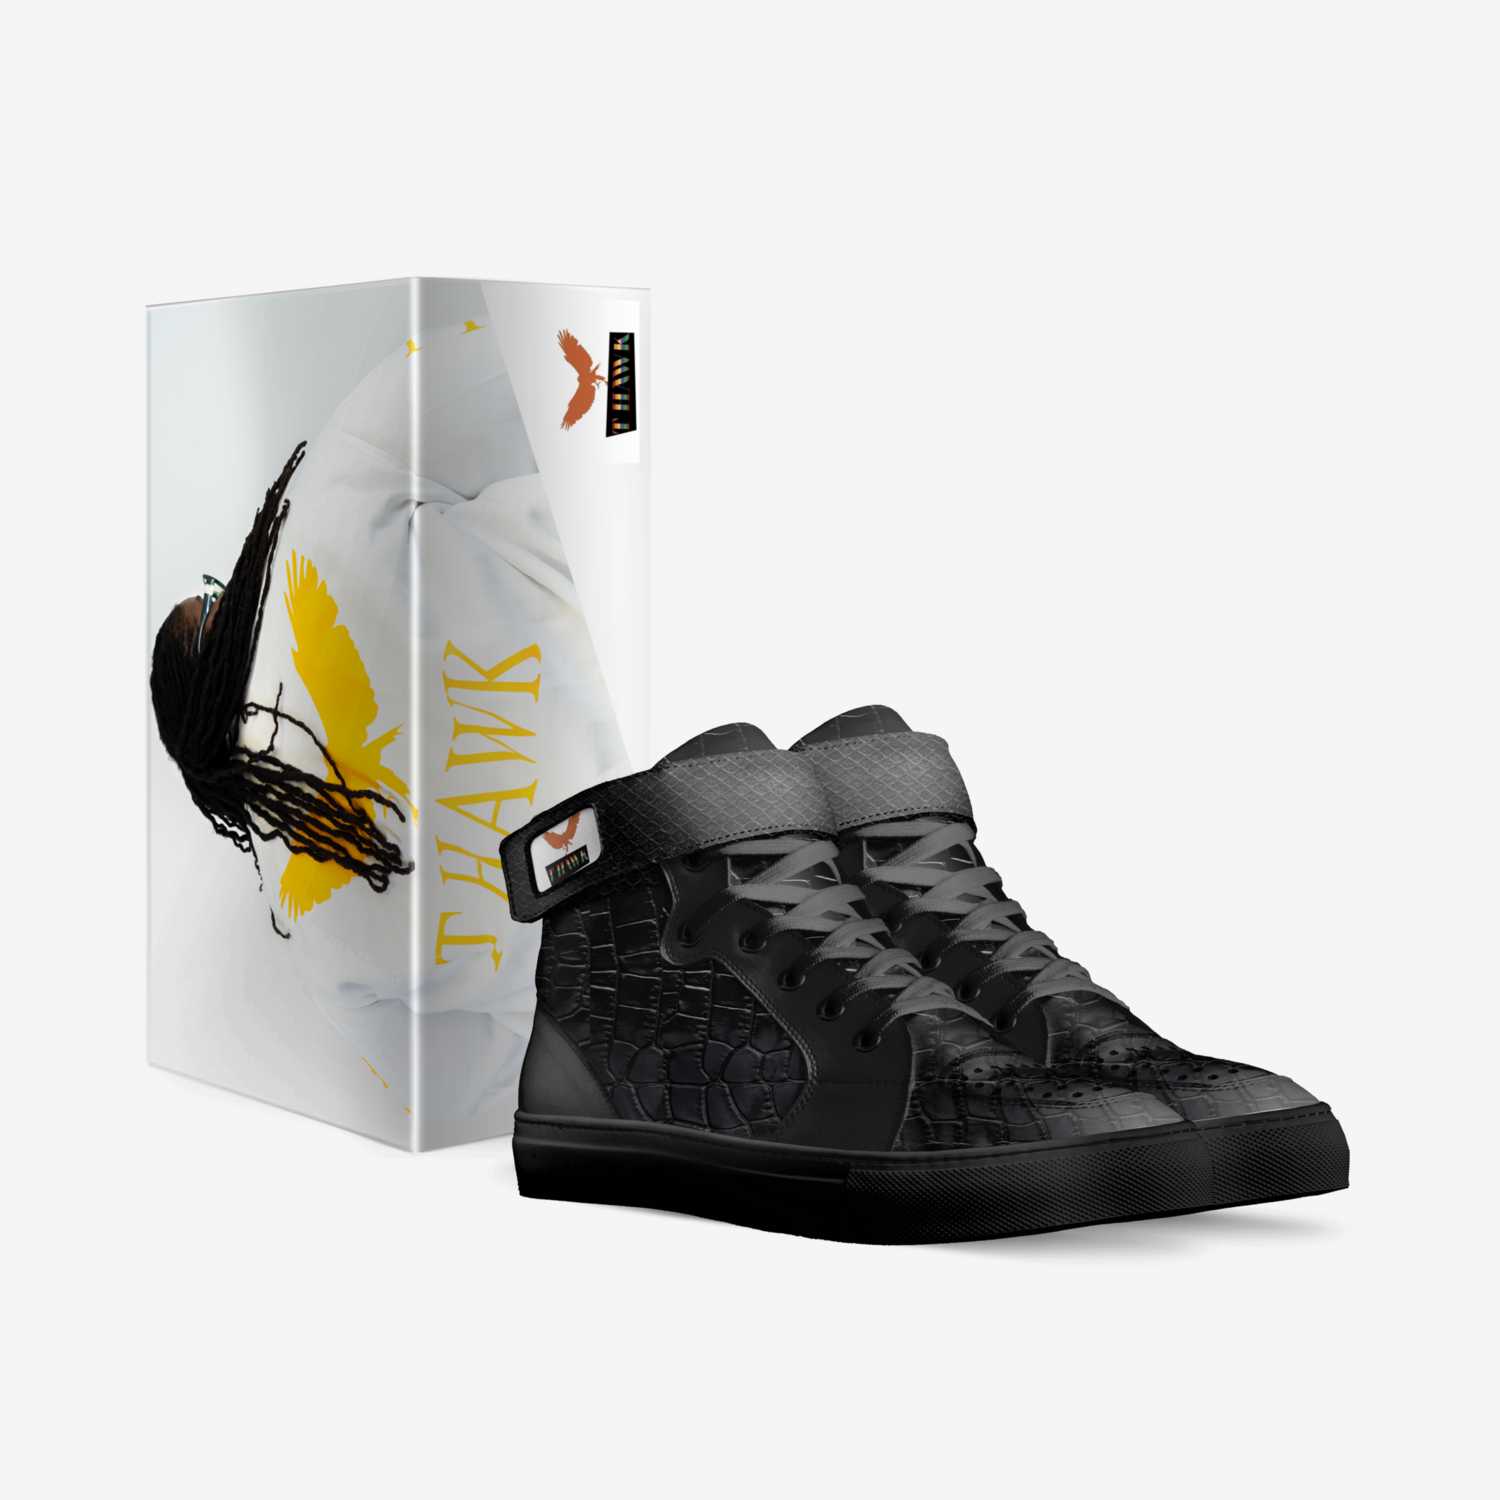 T Hawk custom made in Italy shoes by Tiffany Accor | Box view